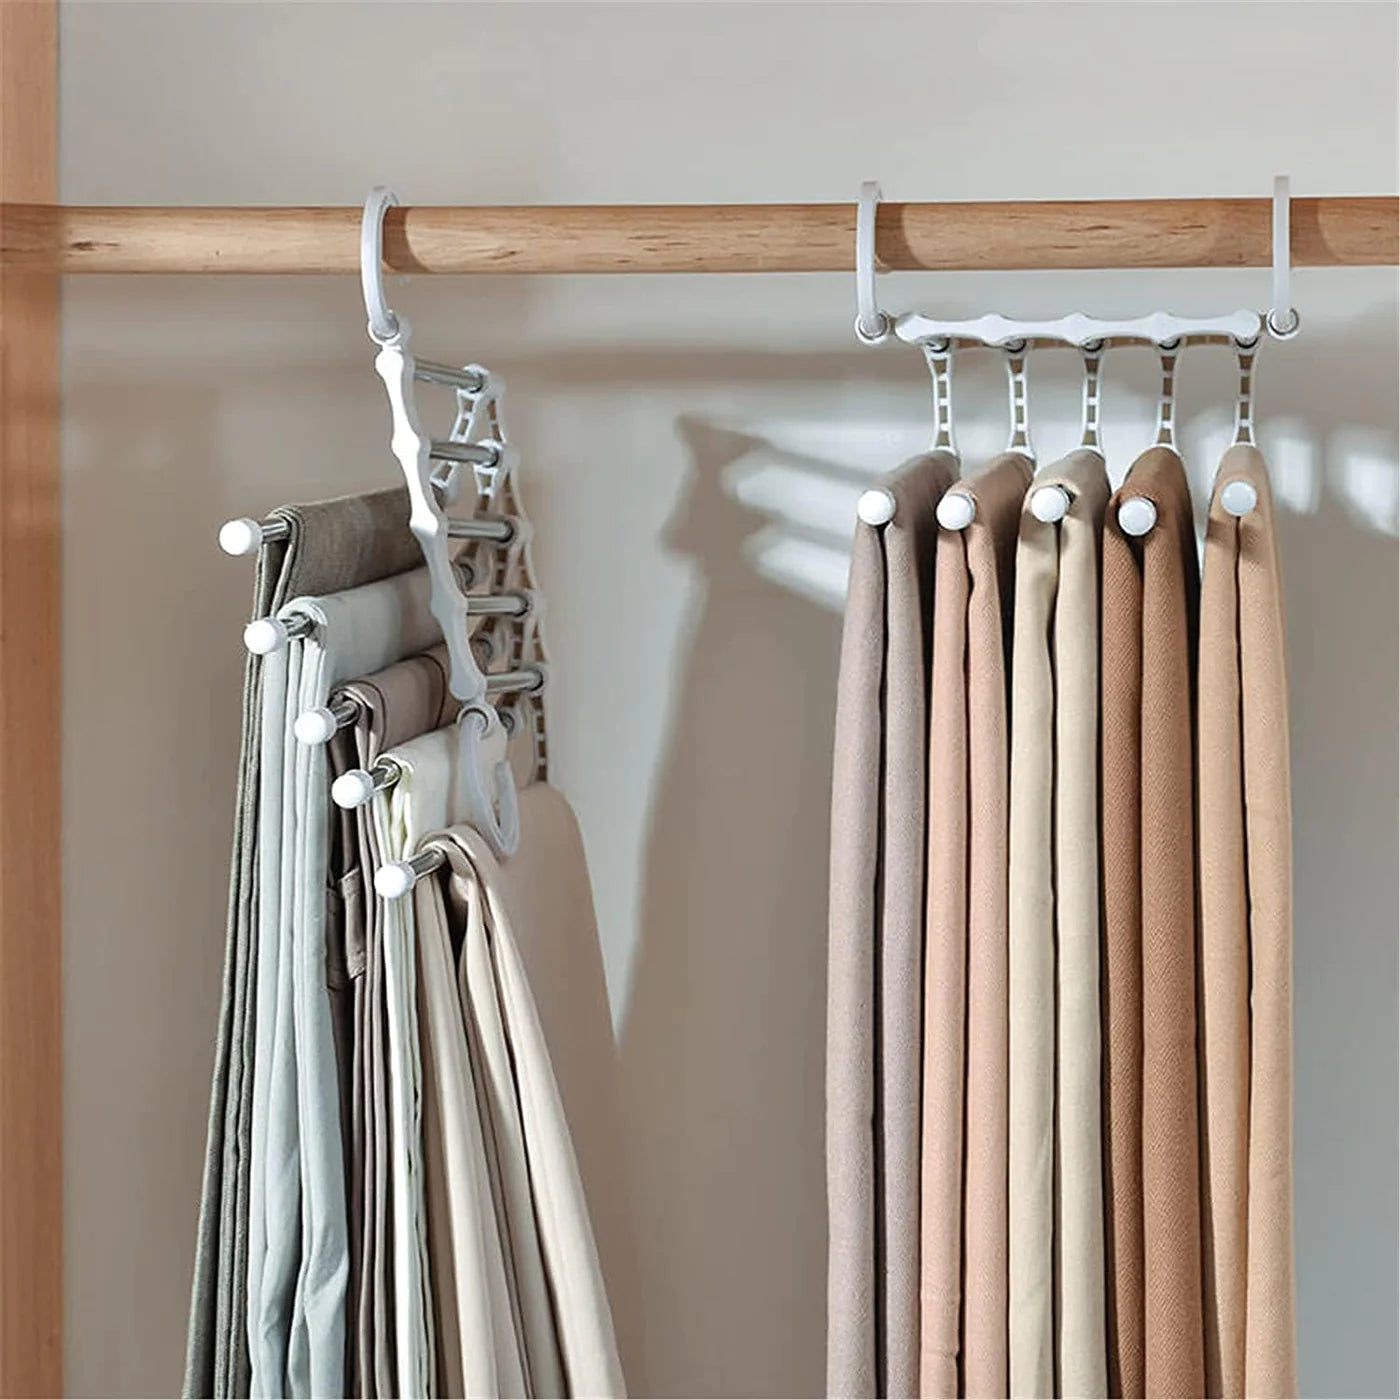 5-in-1 Foldable Space Saving Cloth Hanger